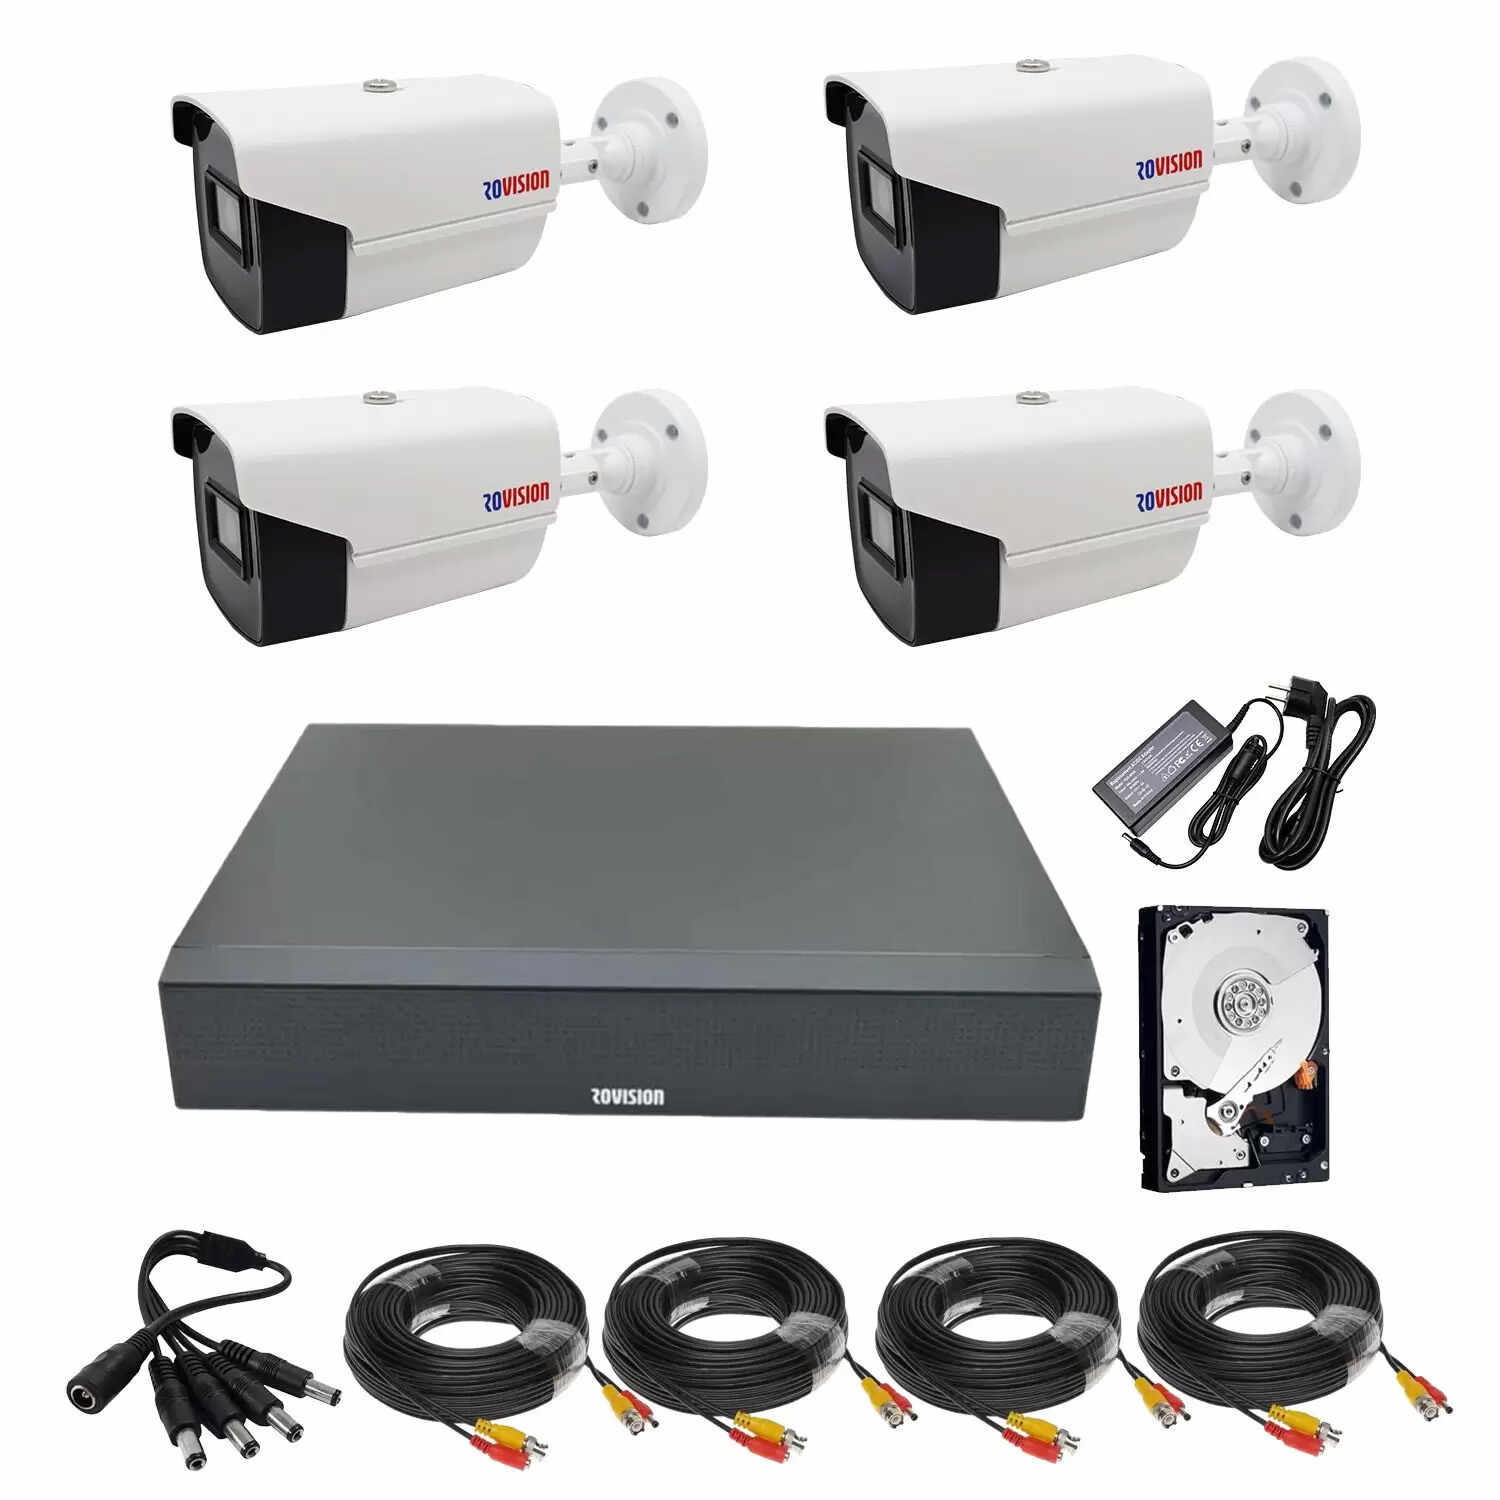 Sistem supraveghere 4 camere Rovision oem Hikvision 2MP Full HD IR 40m, DVR Pentabrid 4 Canale, Accesorii Full, HDD 500 GB